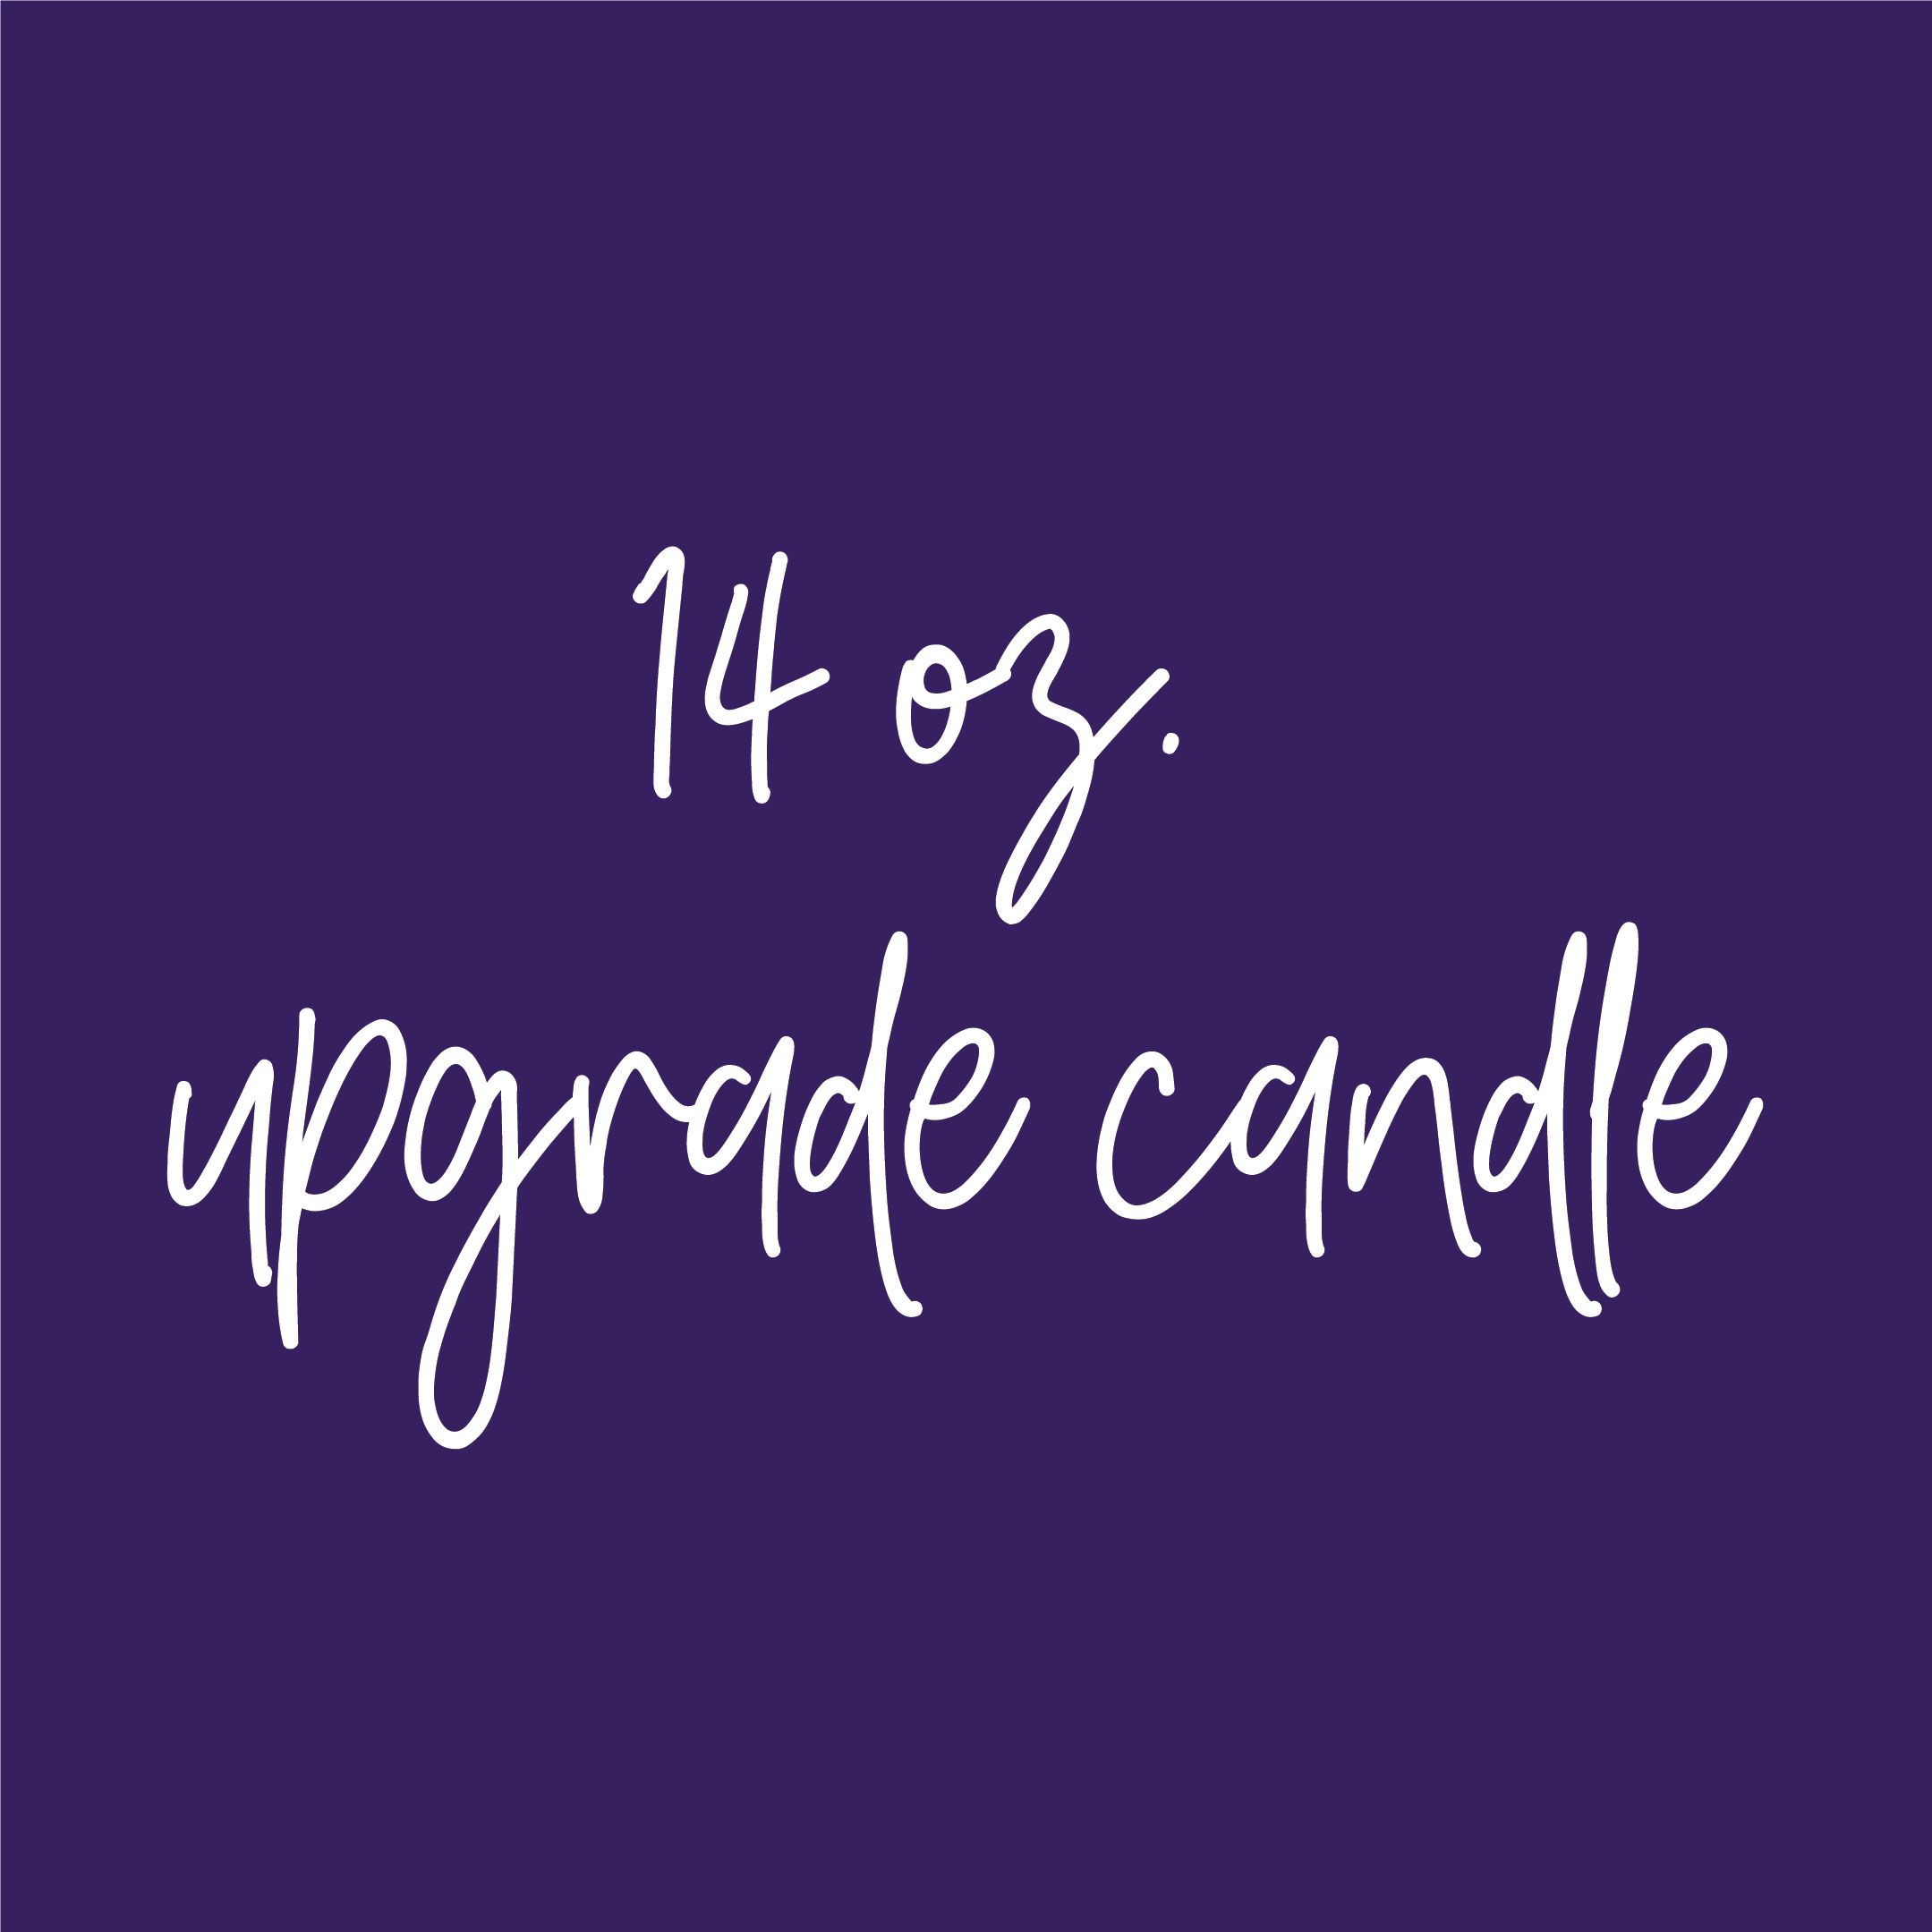 Re-order 14 oz. upgrade candle